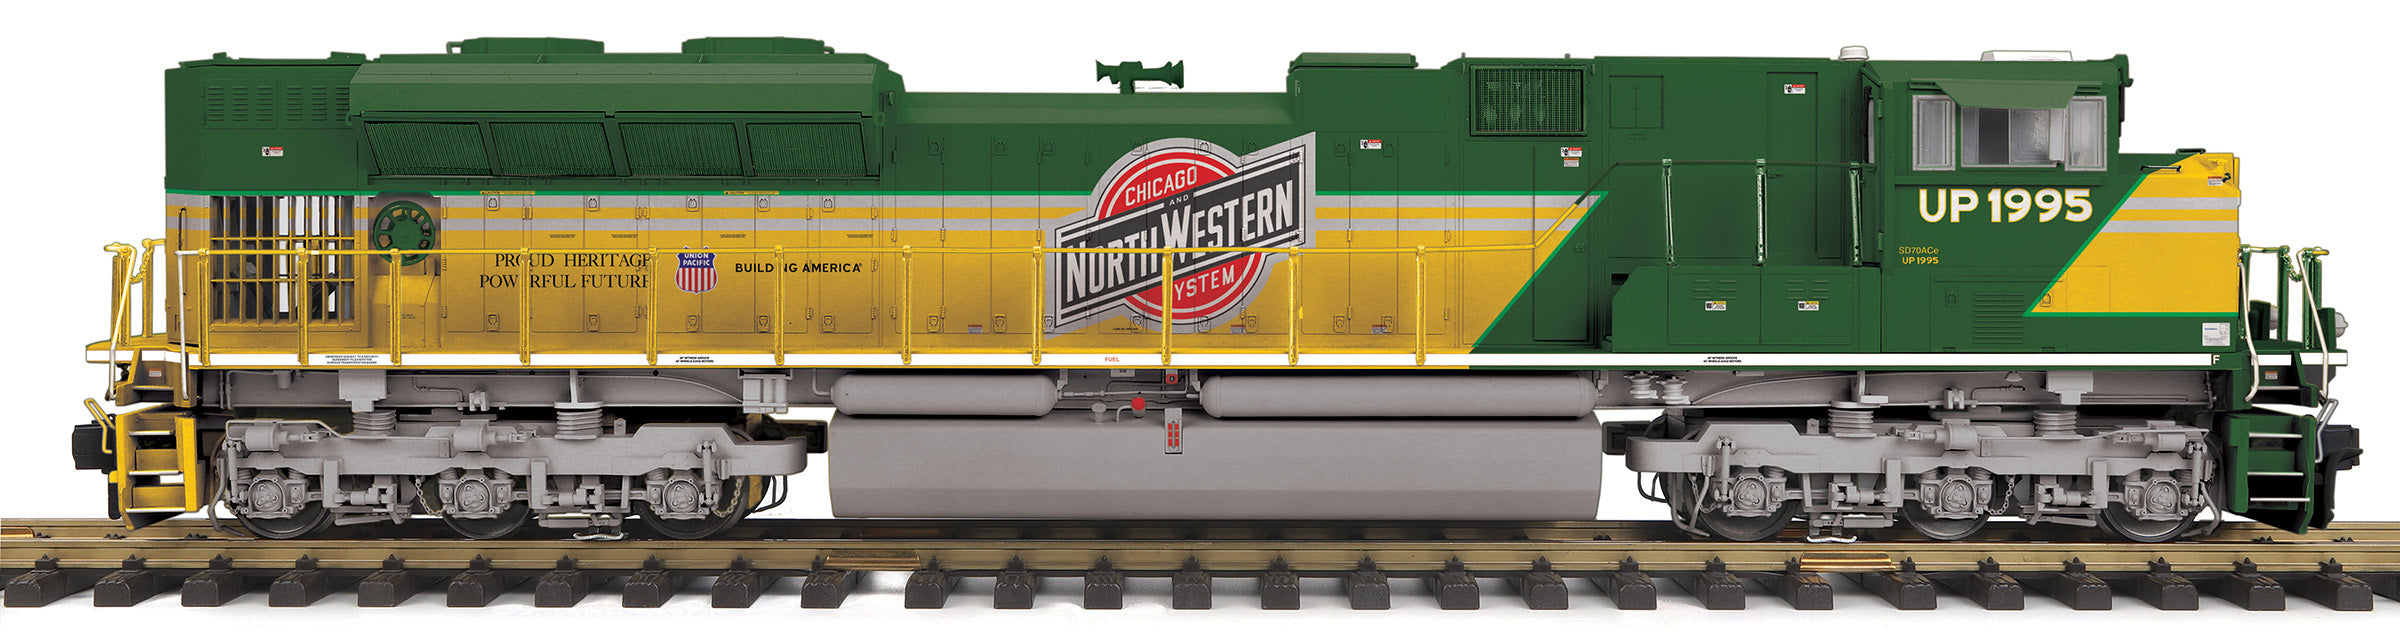 MTH G 70-2164-1 - SD70AH Diesel Engine "Chicago & North Western" (UP Heritage)" #1995 w/ PS3 - Custom Run for MrMuffin'sTrains / Sidetrack Hobbies